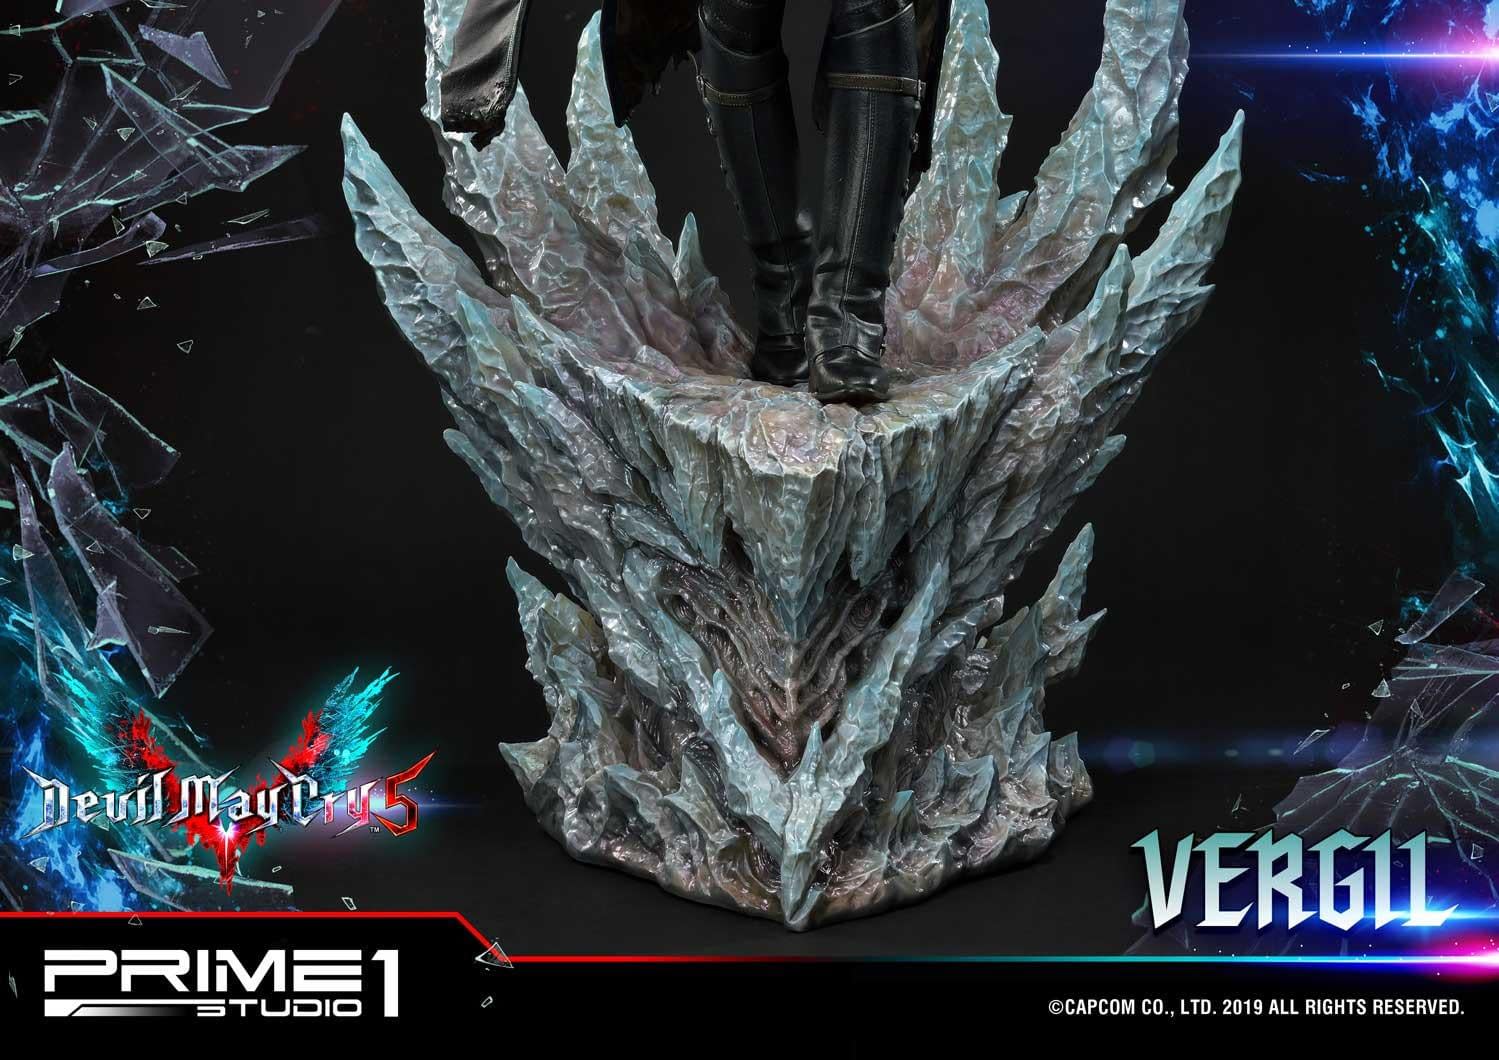 Devil May Cry 5” Vergil Gets New Statue From Prime 1 Studio